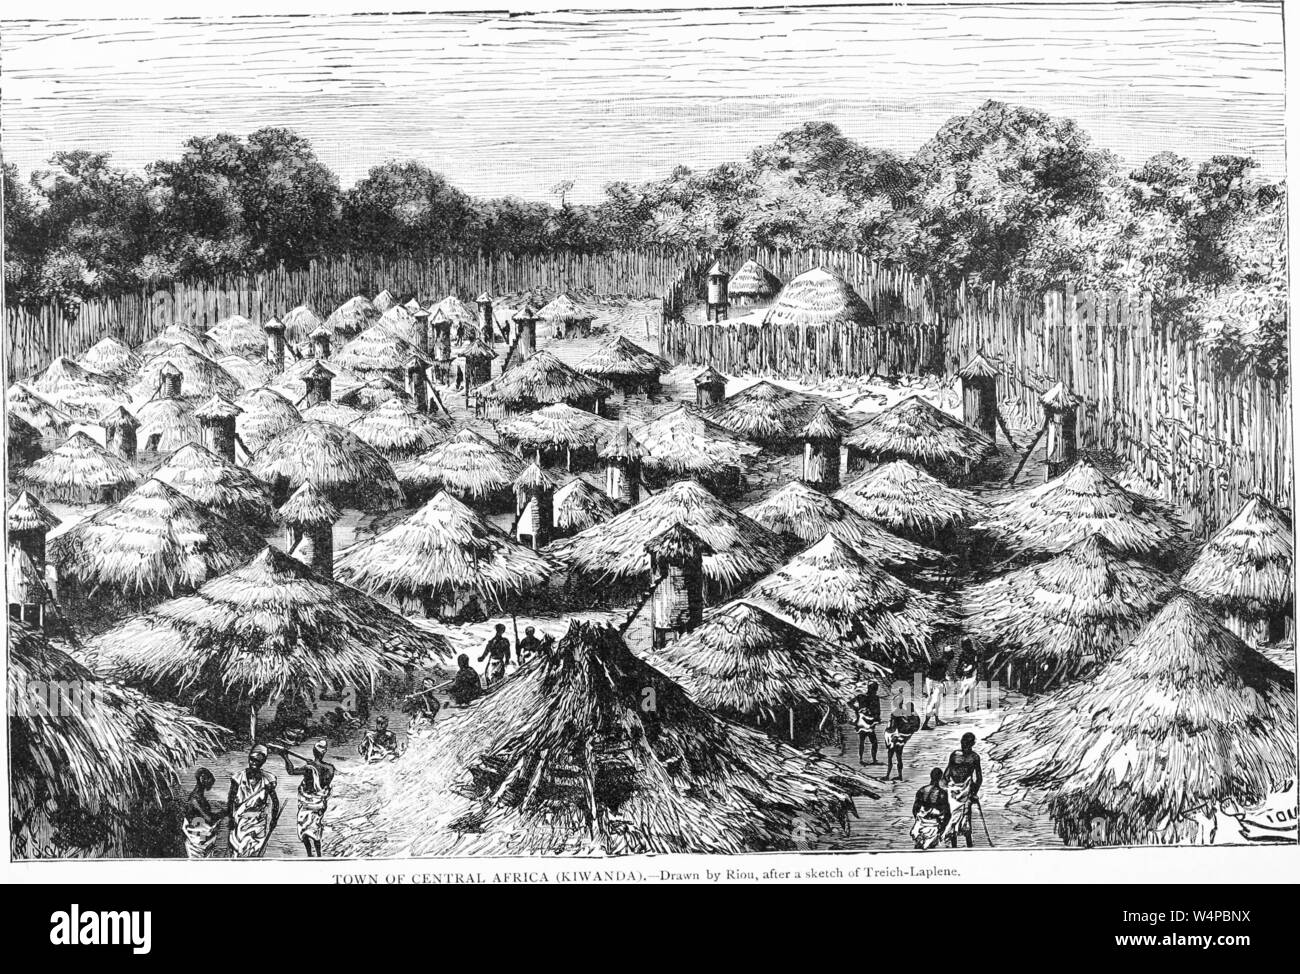 Engraved drawing of the Kiwanda, Town of Central Africa, from the book 'Ridpath's Universal history' by John Clark Ridpath, 1897. Courtesy Internet Archive. () Stock Photo